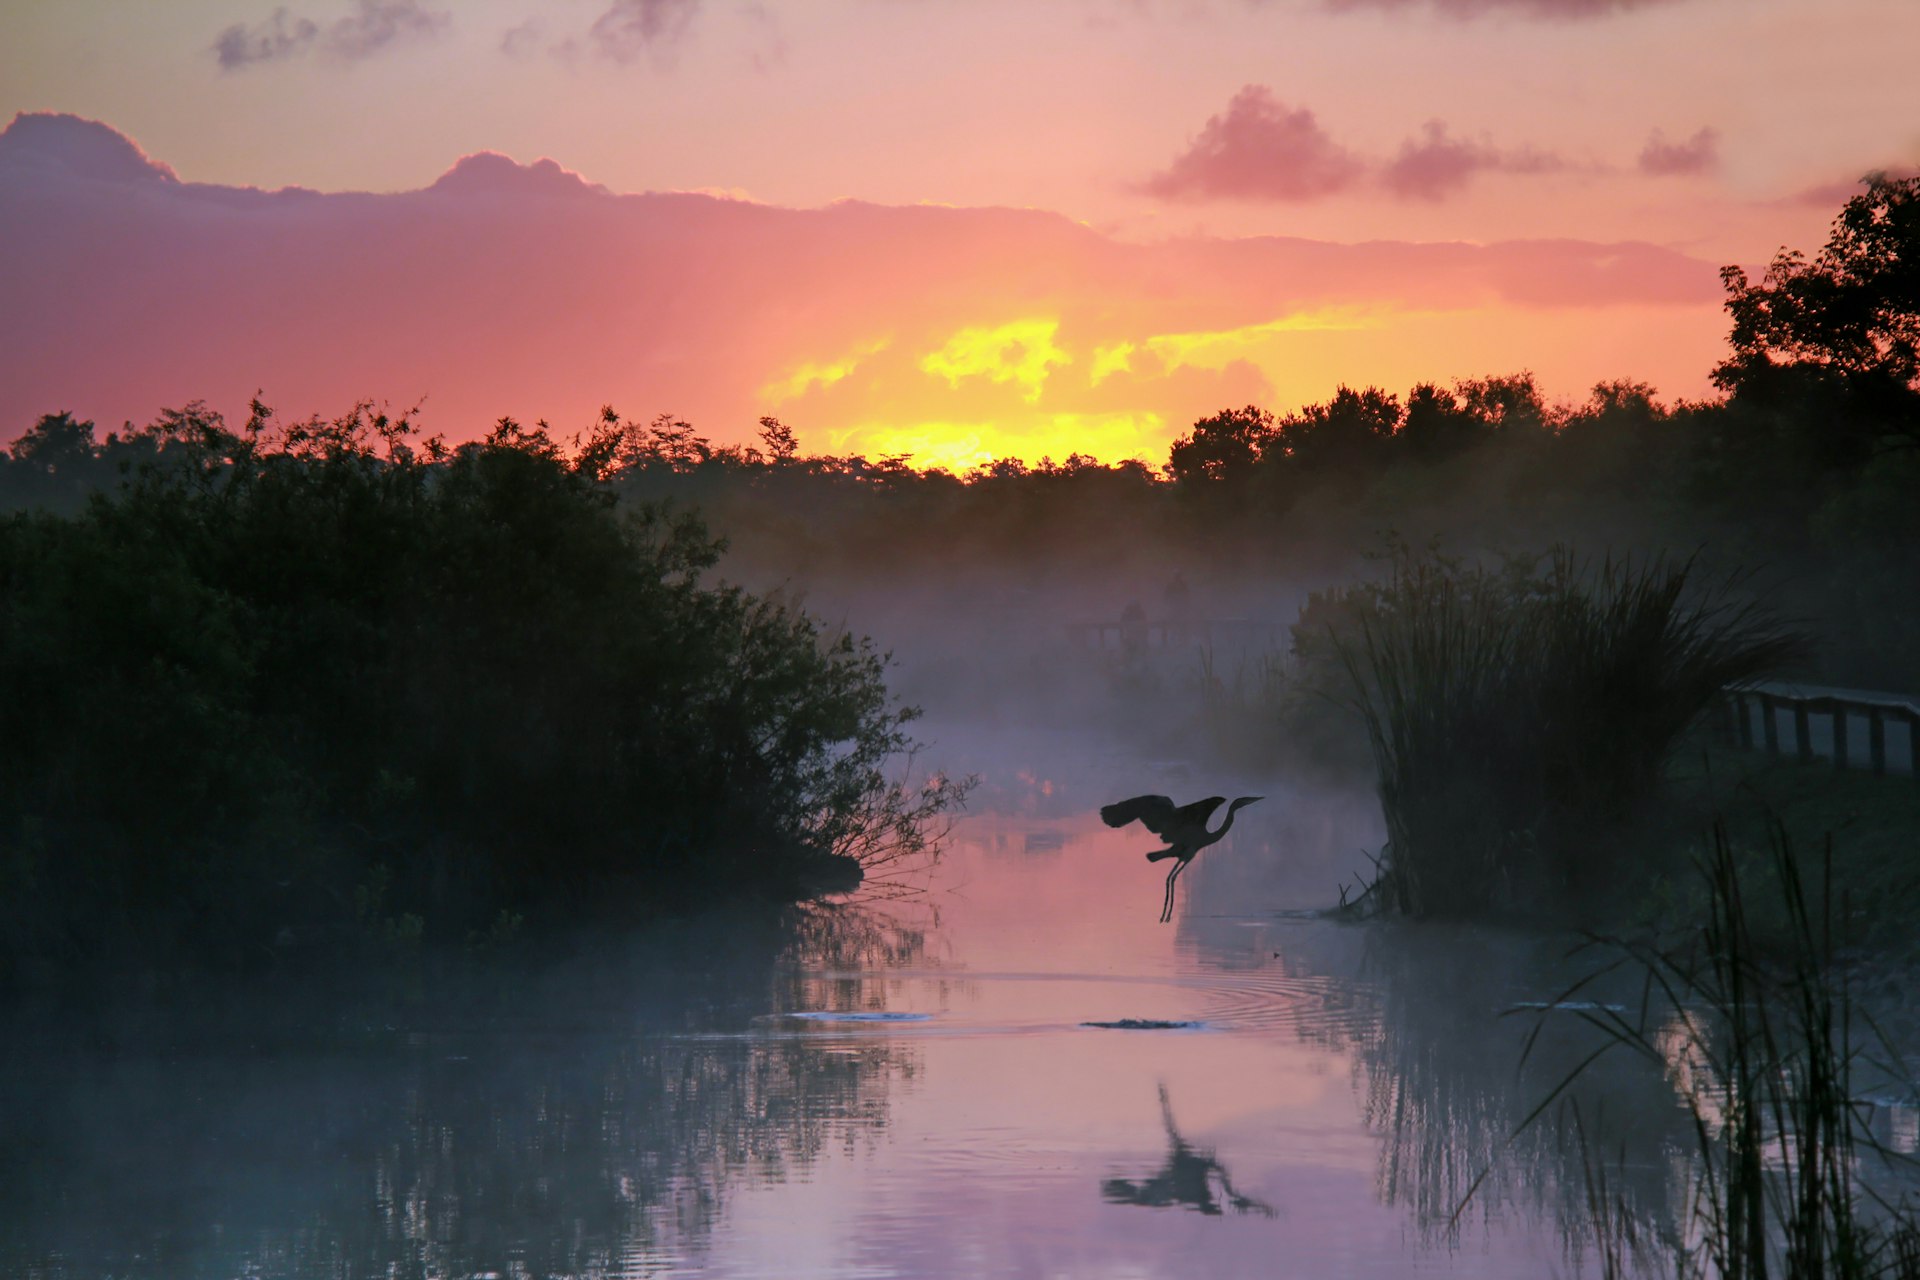 A heron takes flight in an area of water surrounded by grassland as the sun rises